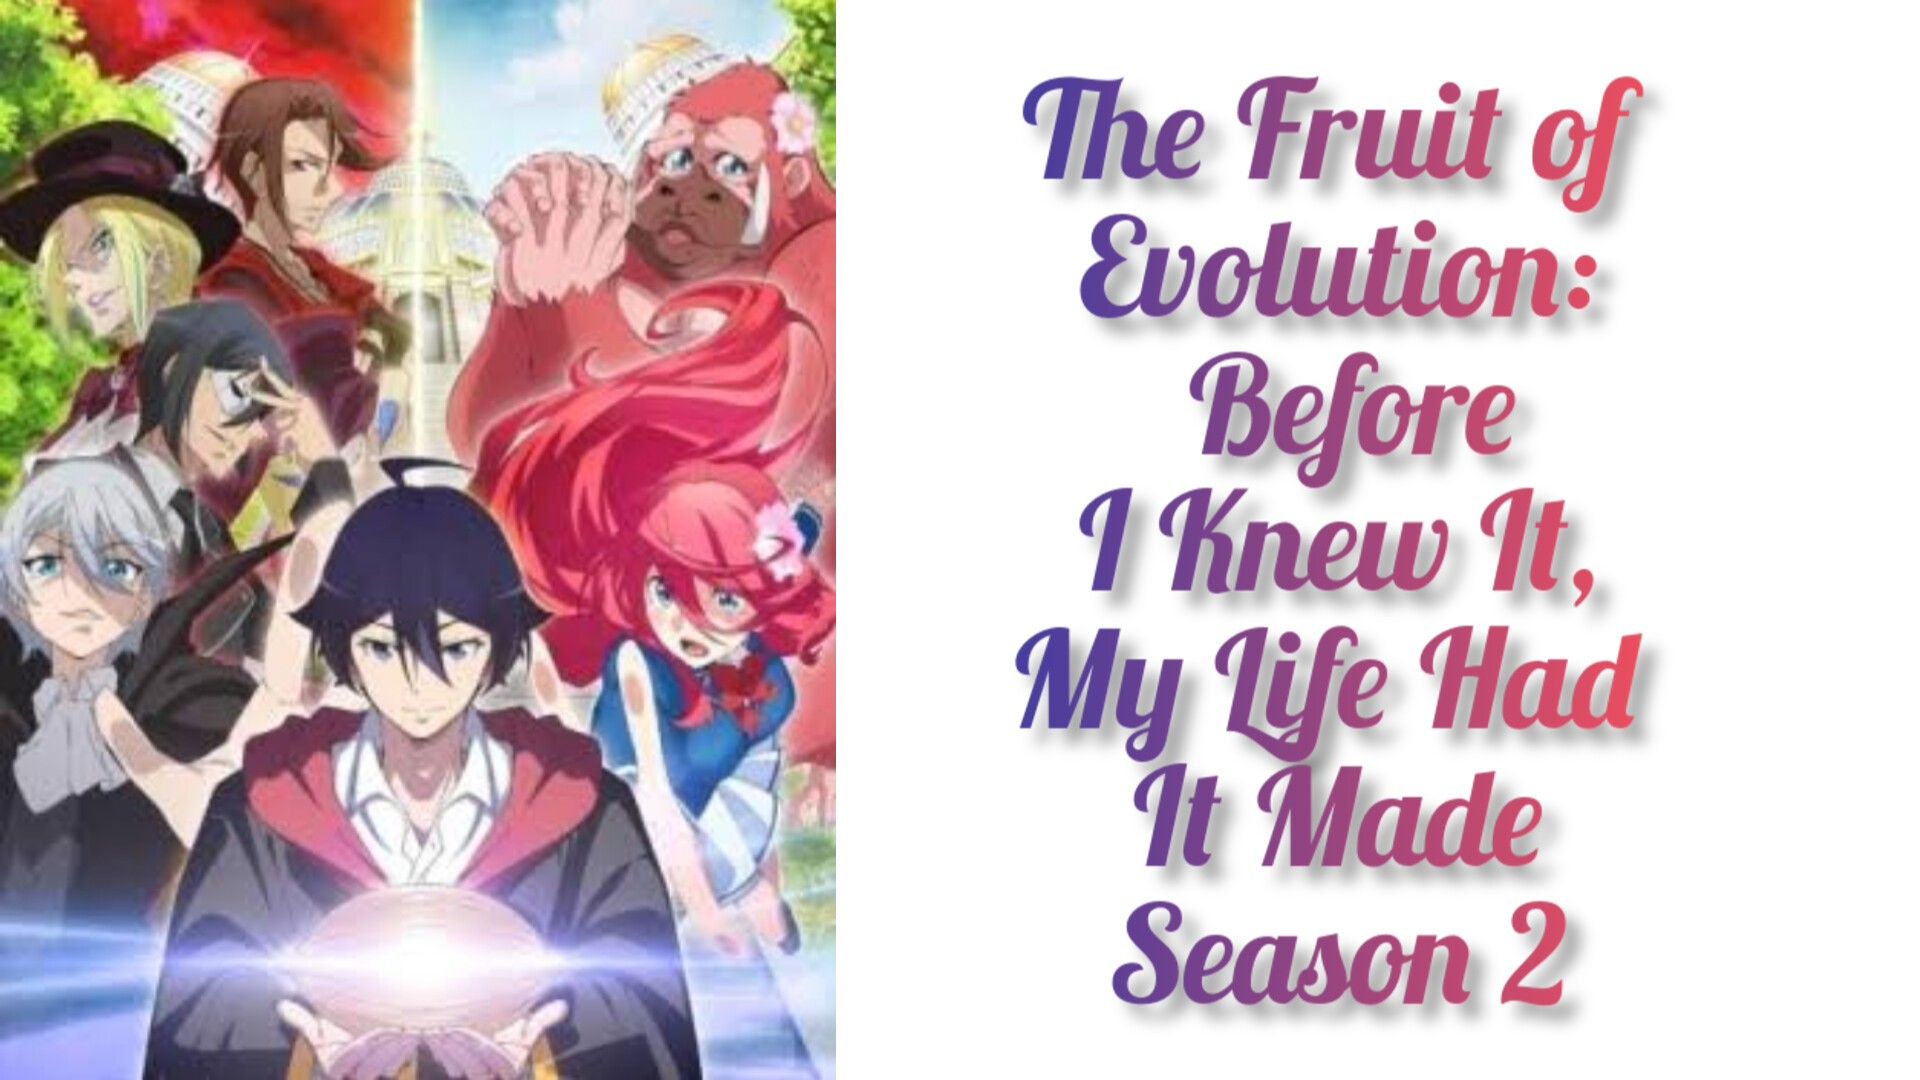 The Fruit of Evolution: Before I Knew It, My Life Had It Made (TV